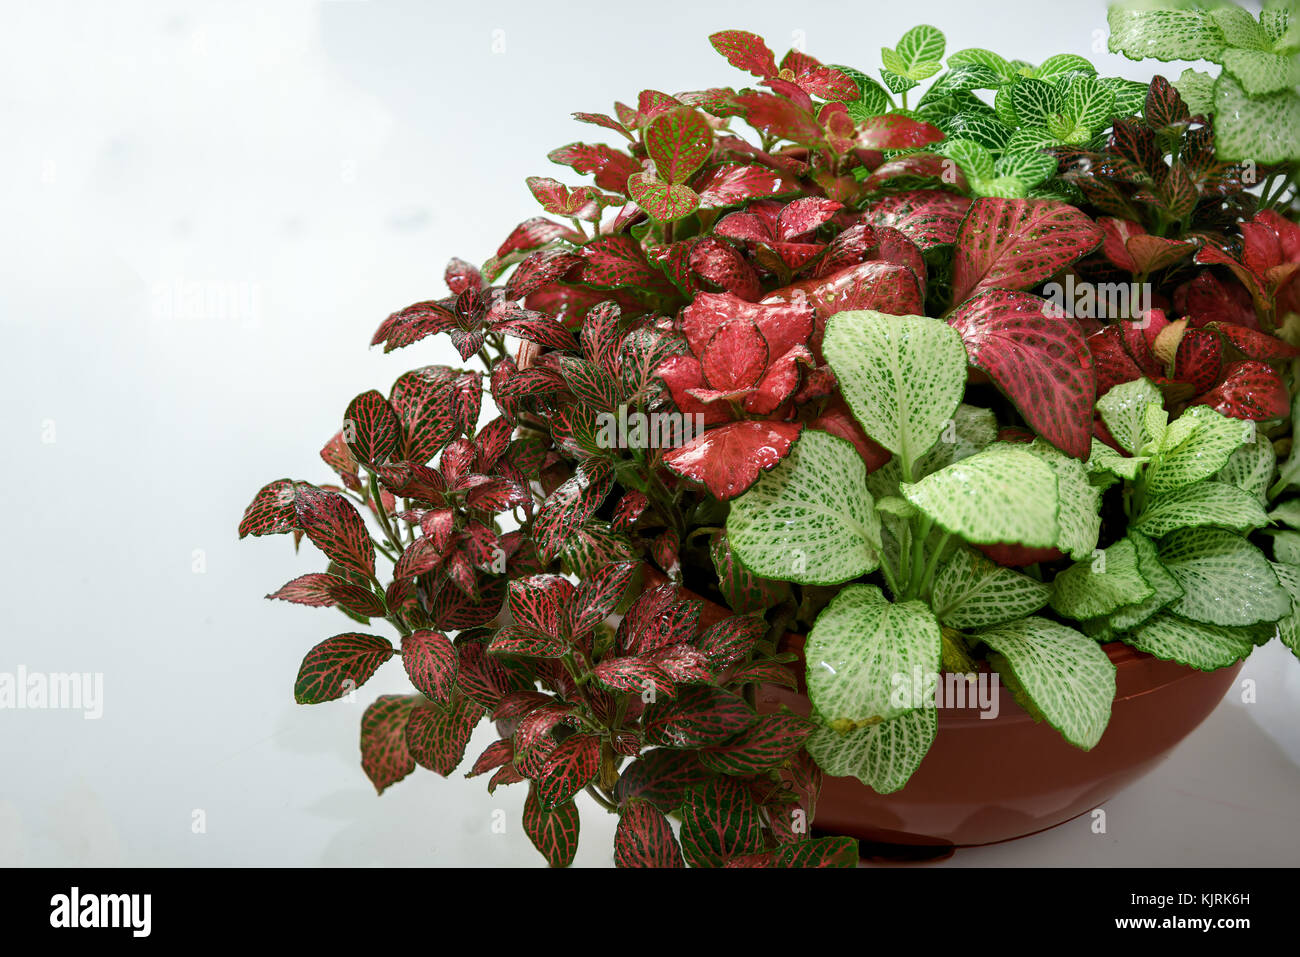 several varieties and colors of home colors fitton in a brown pot Stock Photo